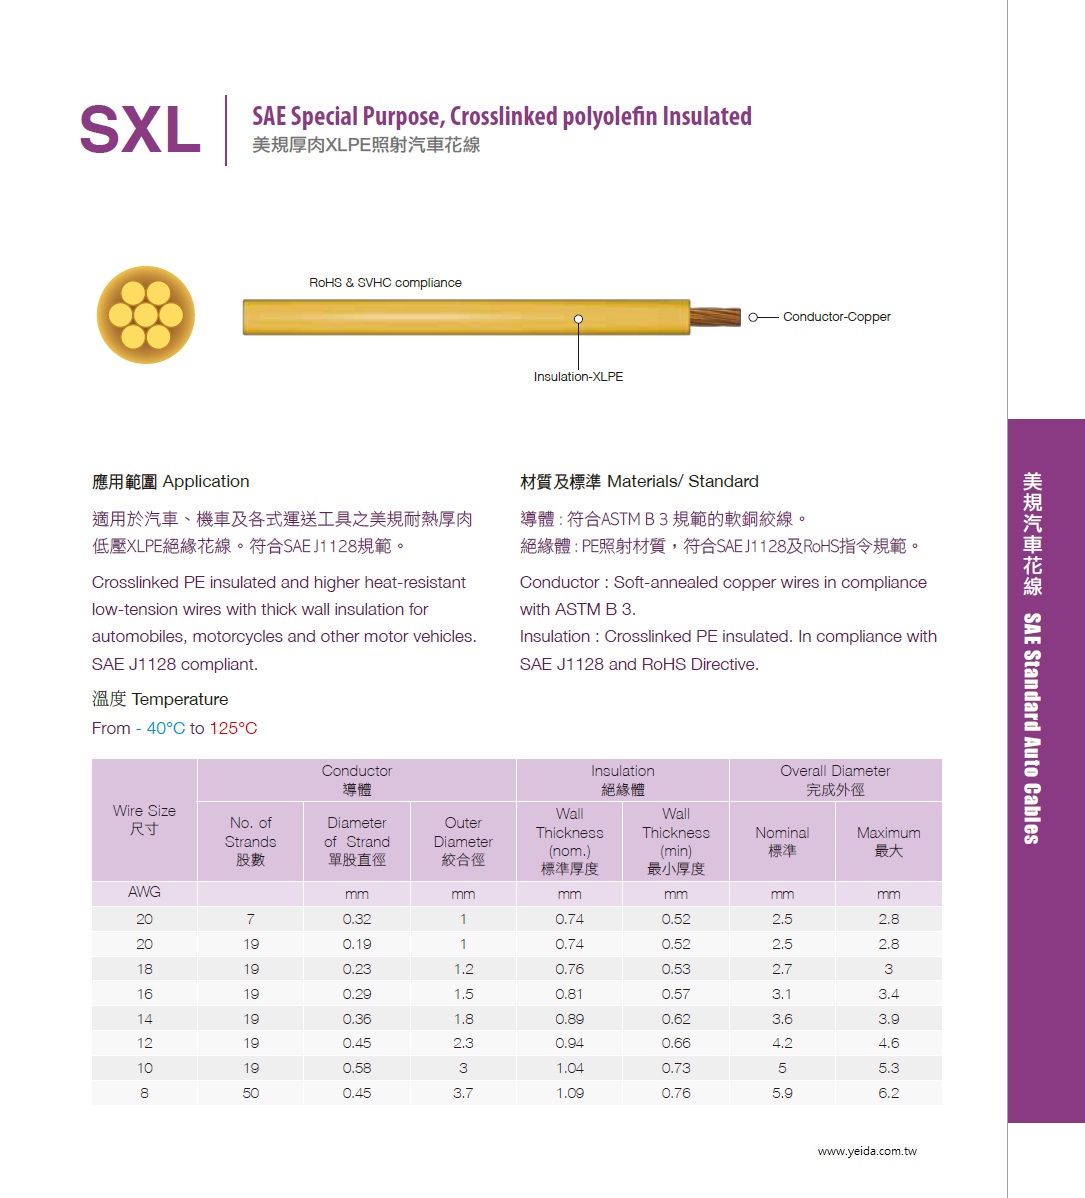 SXL SAE Special Purpose, Crosslinked polyolefin Insulated higher heat-resistant low-tension wires 符合SAE J1128規範美規厚肉XLPE照射汽車花線產品圖